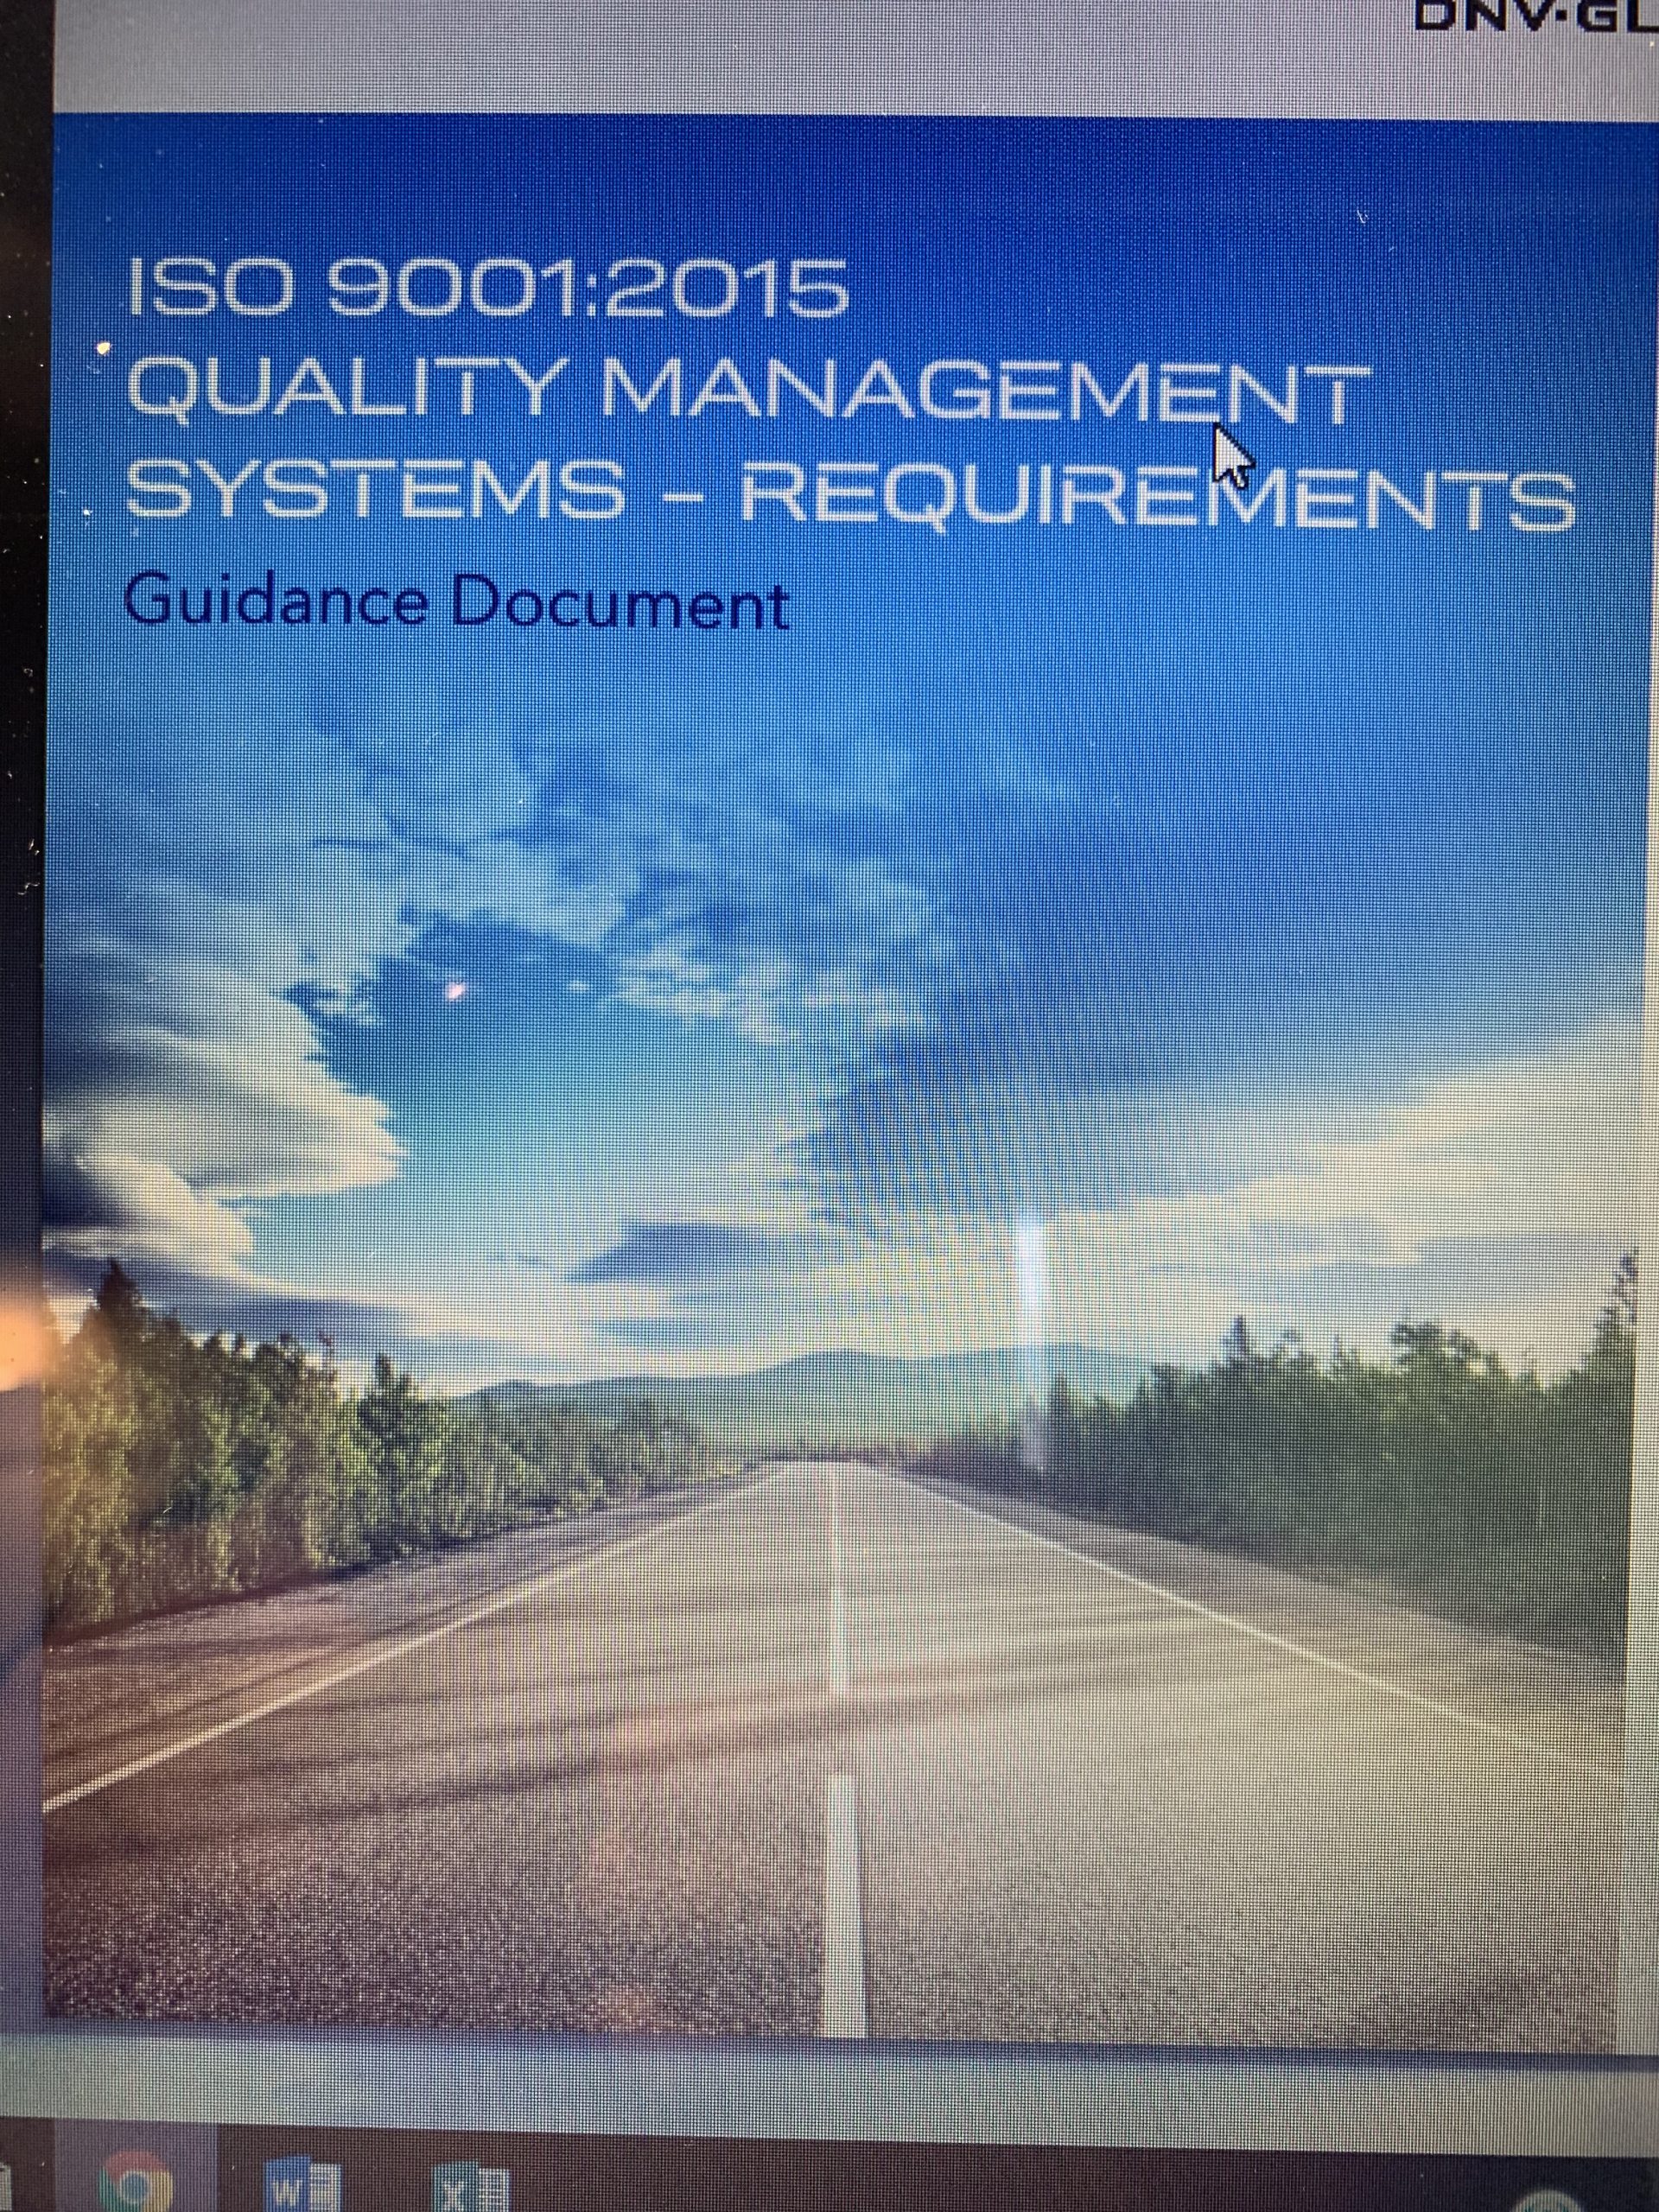 Image 2. Support material, ISO9001:2015 Standard, Quality Management Systems Requeriments, Guidance Document (03/19/2019). PROJECTS RF USA